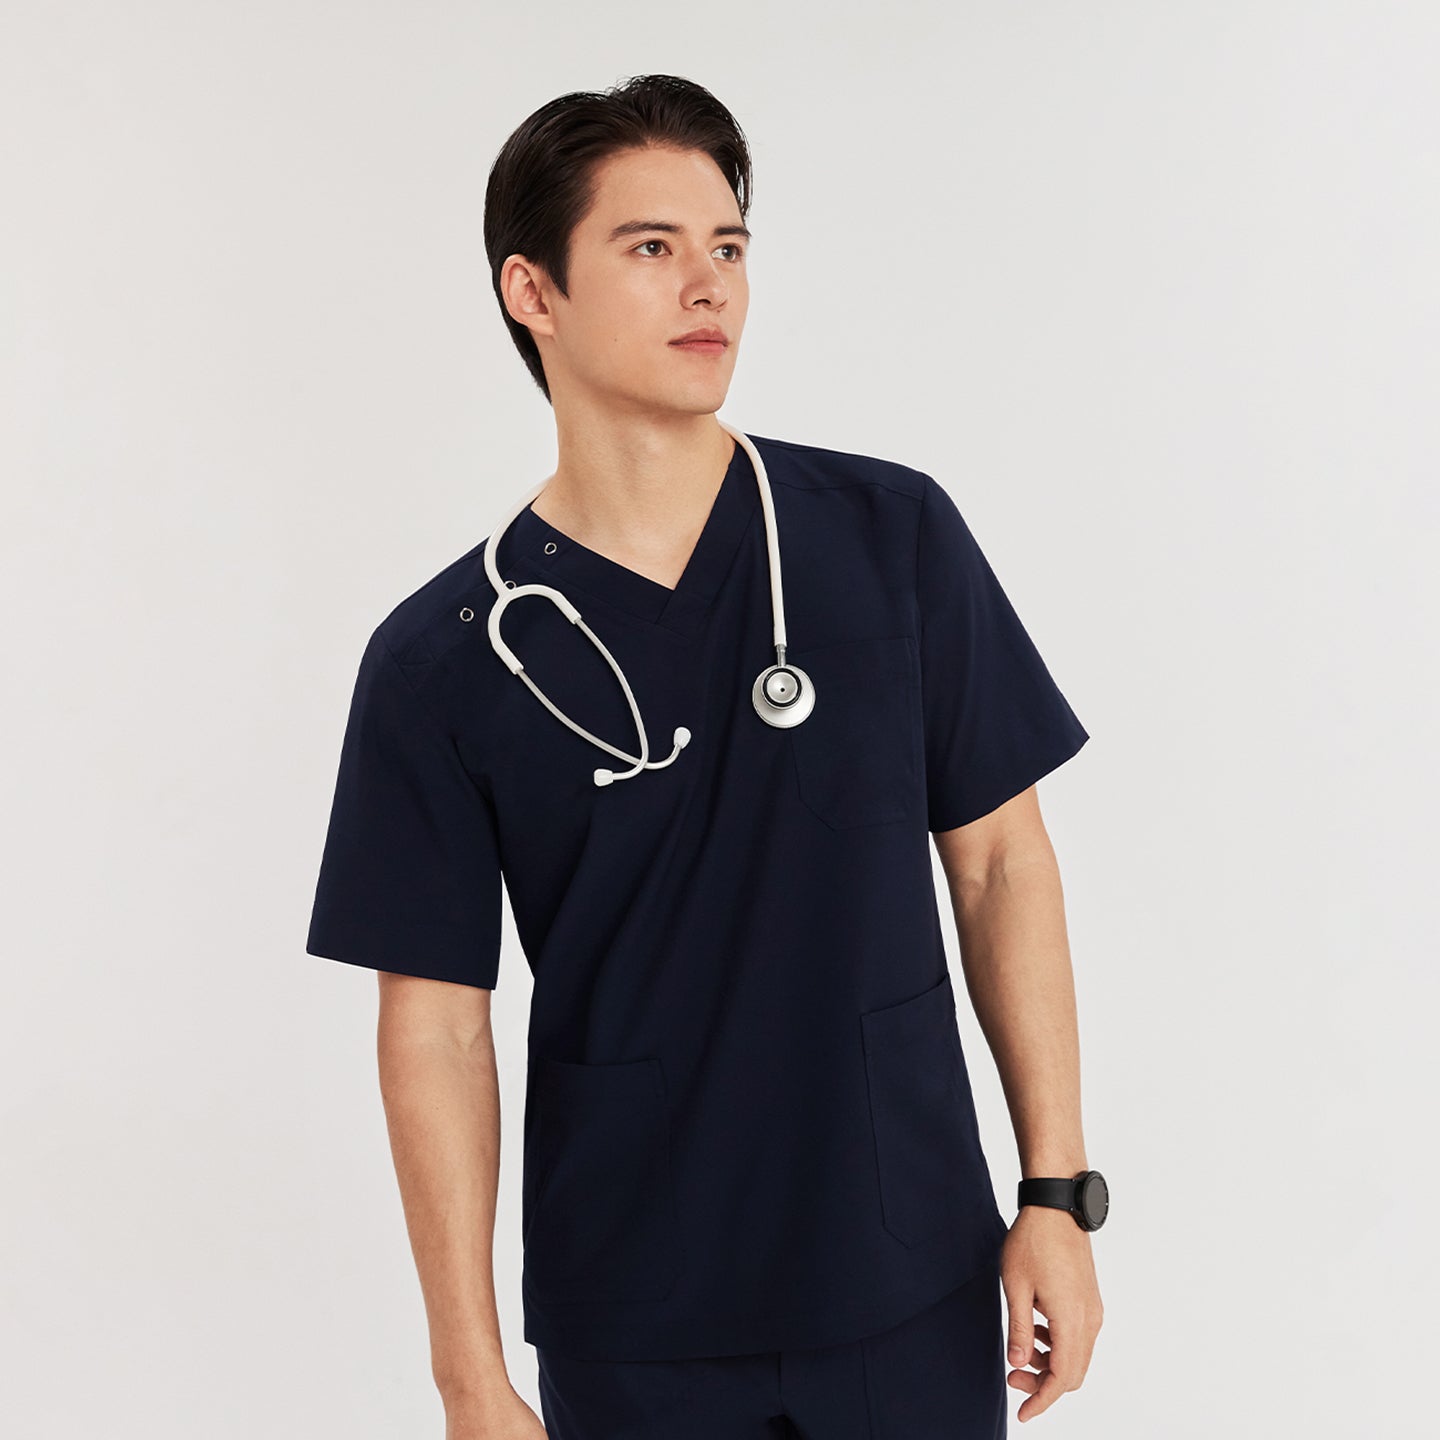 Man wearing a scrub top with three-button shoulder detail and a stethoscope around his neck, standing with a confident pose,Navy